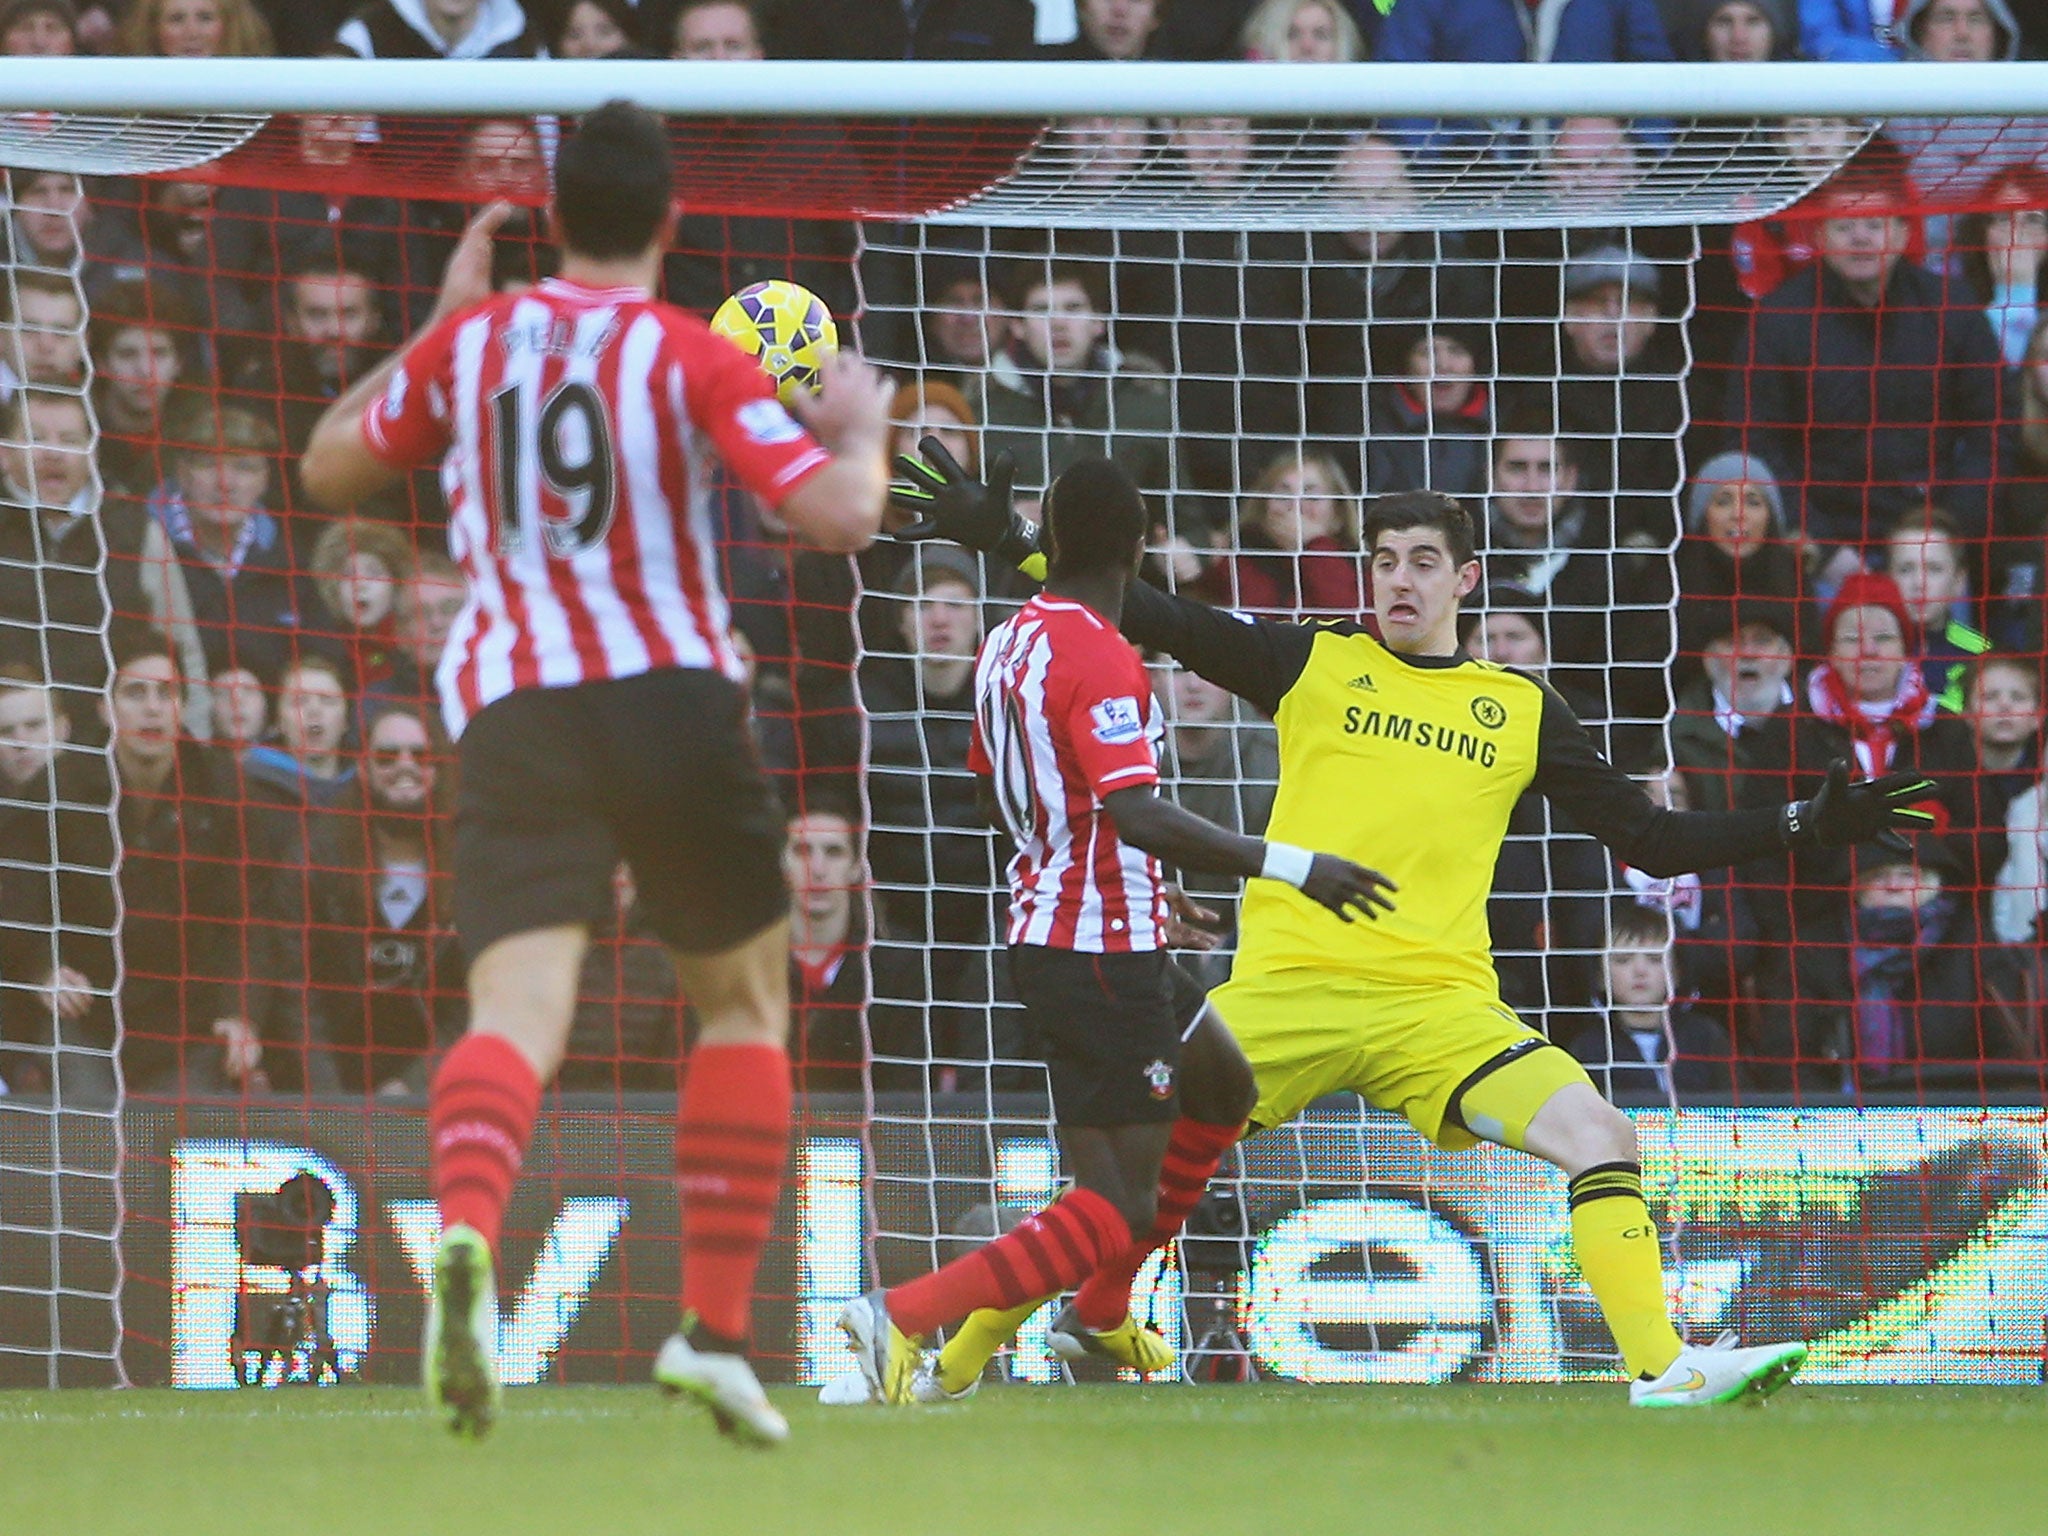 Southampton vs Chelsea match Eden makes a point Blues count blessings | The | The Independent